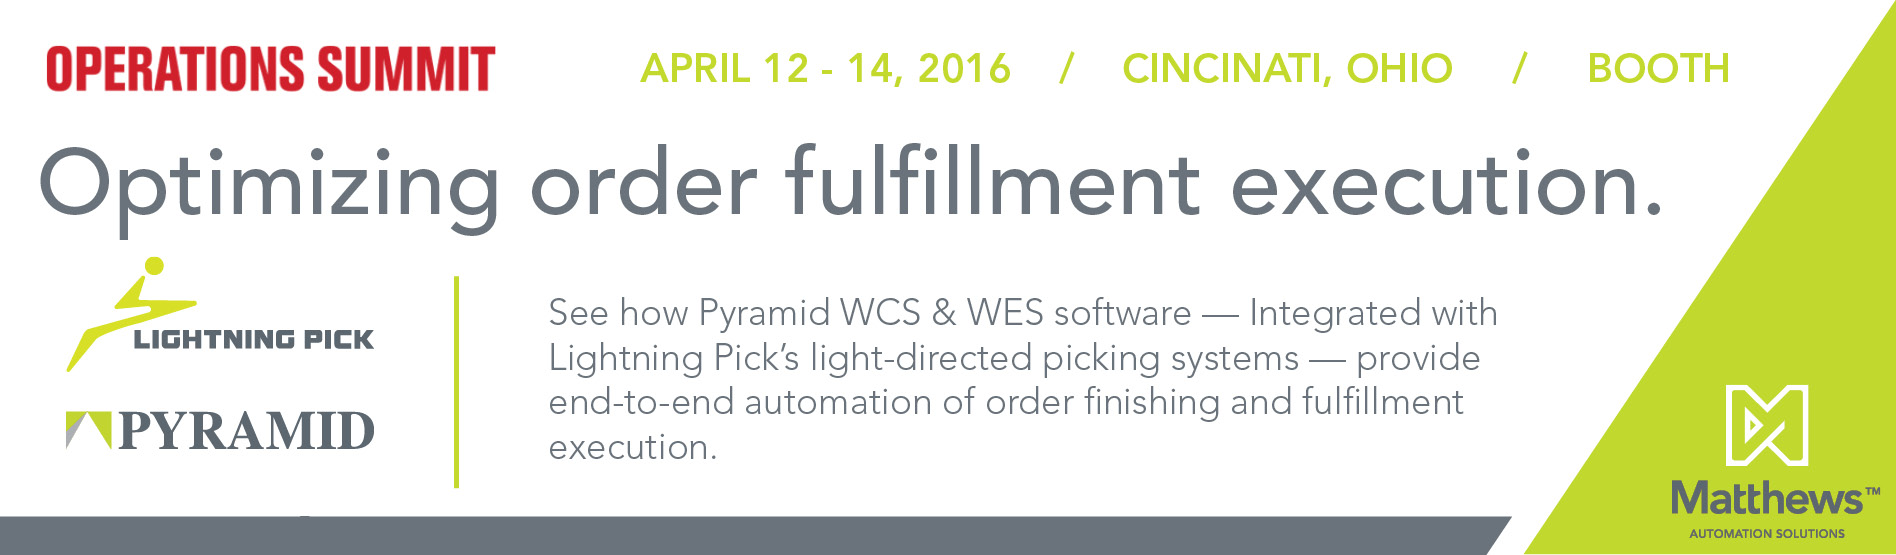 See Lightning Pick, Pyramid’s Optimized Order Fulfillment Solutions at Operations Summit.